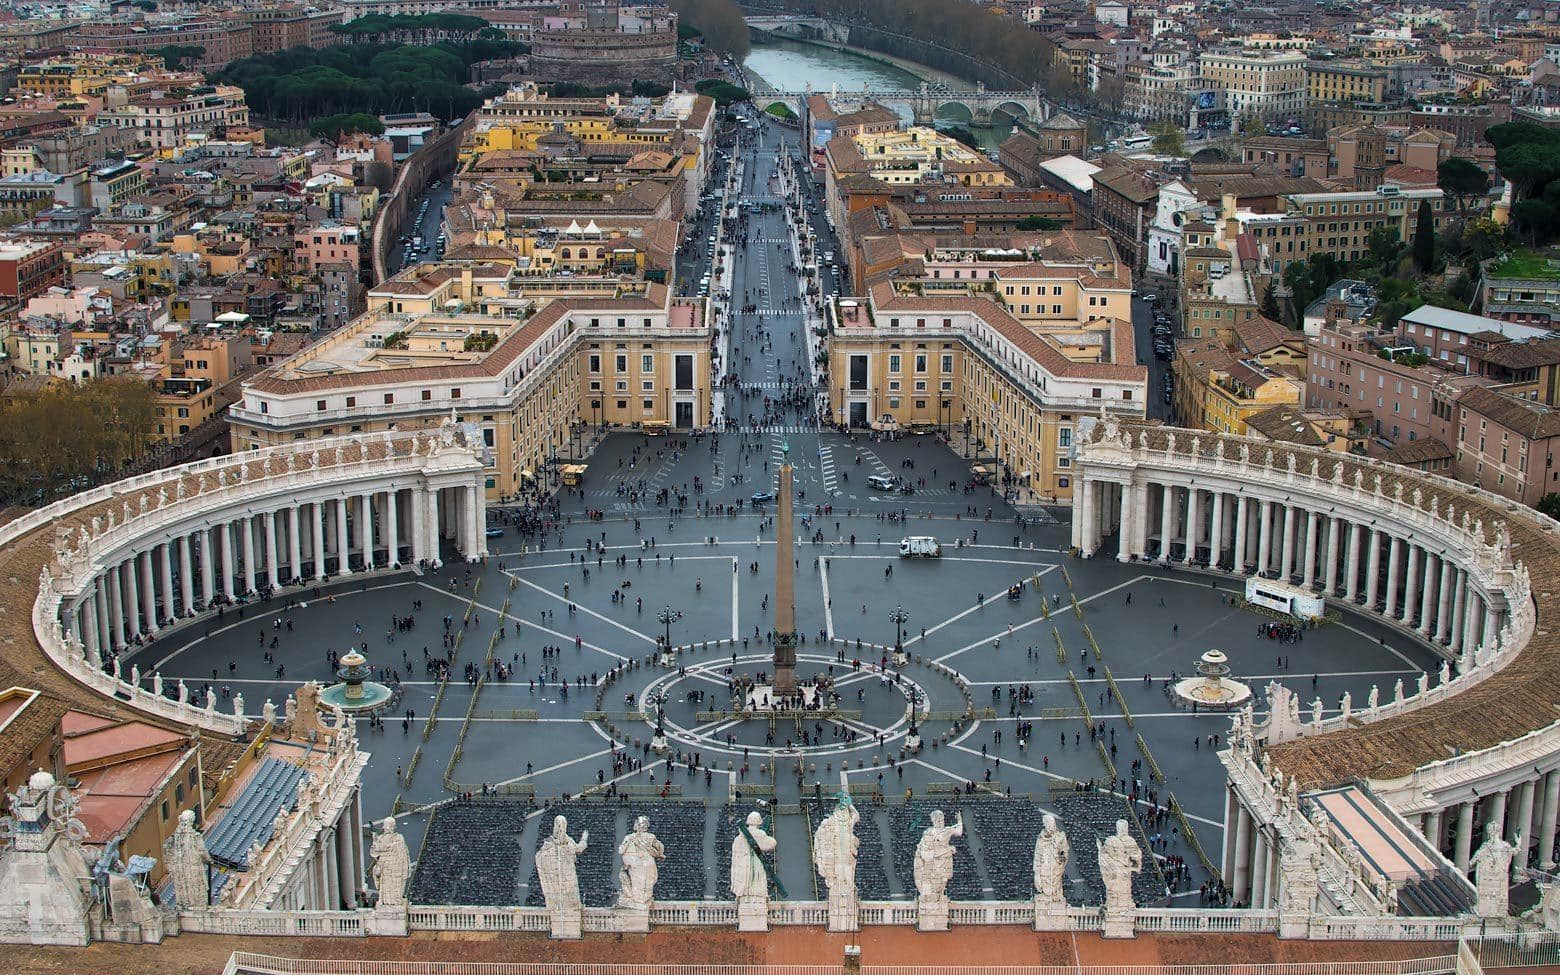 st.Peter's square from the top of the basilica